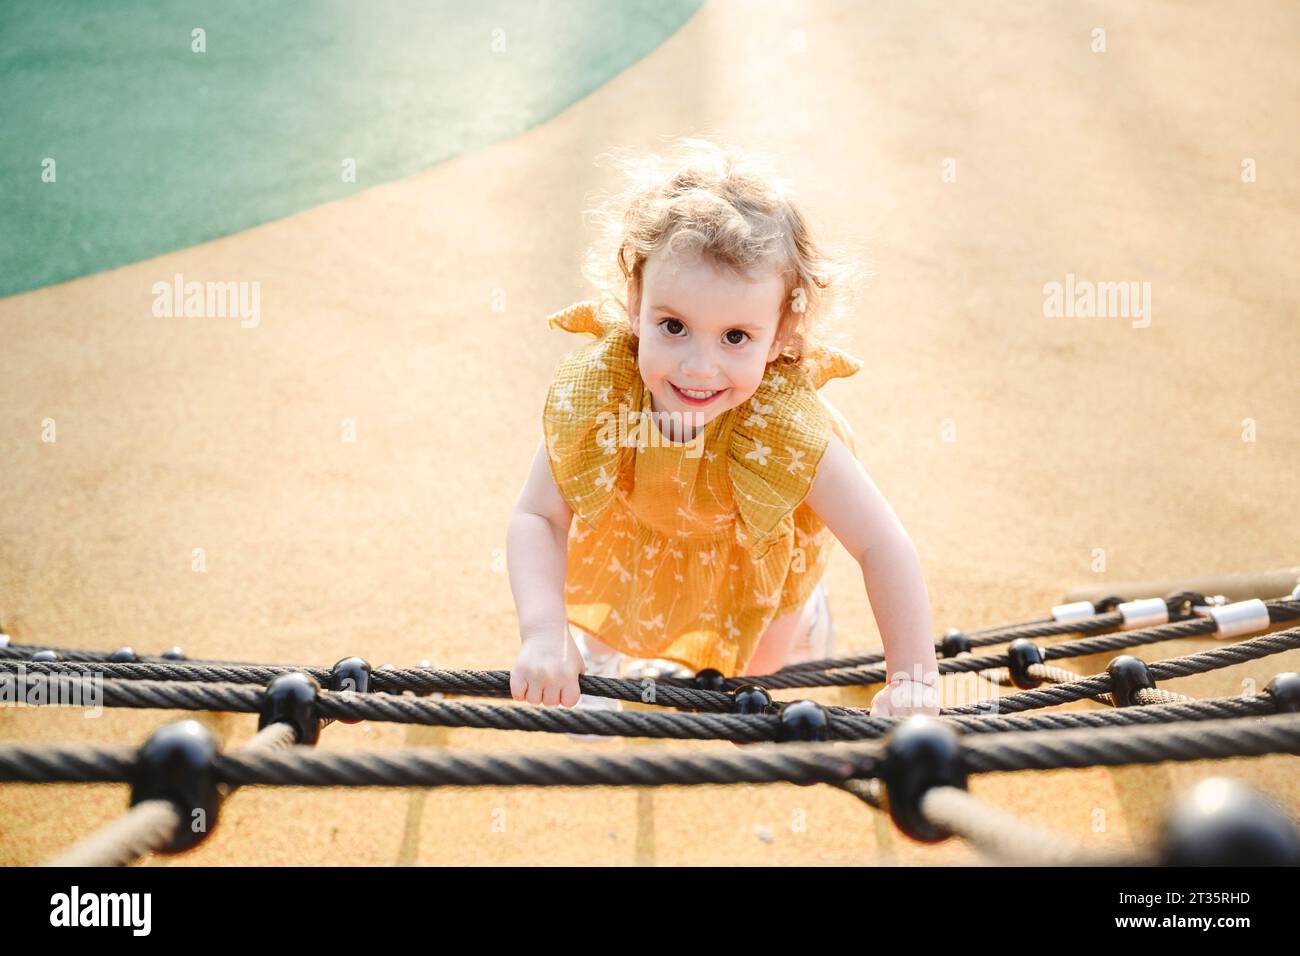 Smiling girl climbing on rope at jungle gym Stock Photo